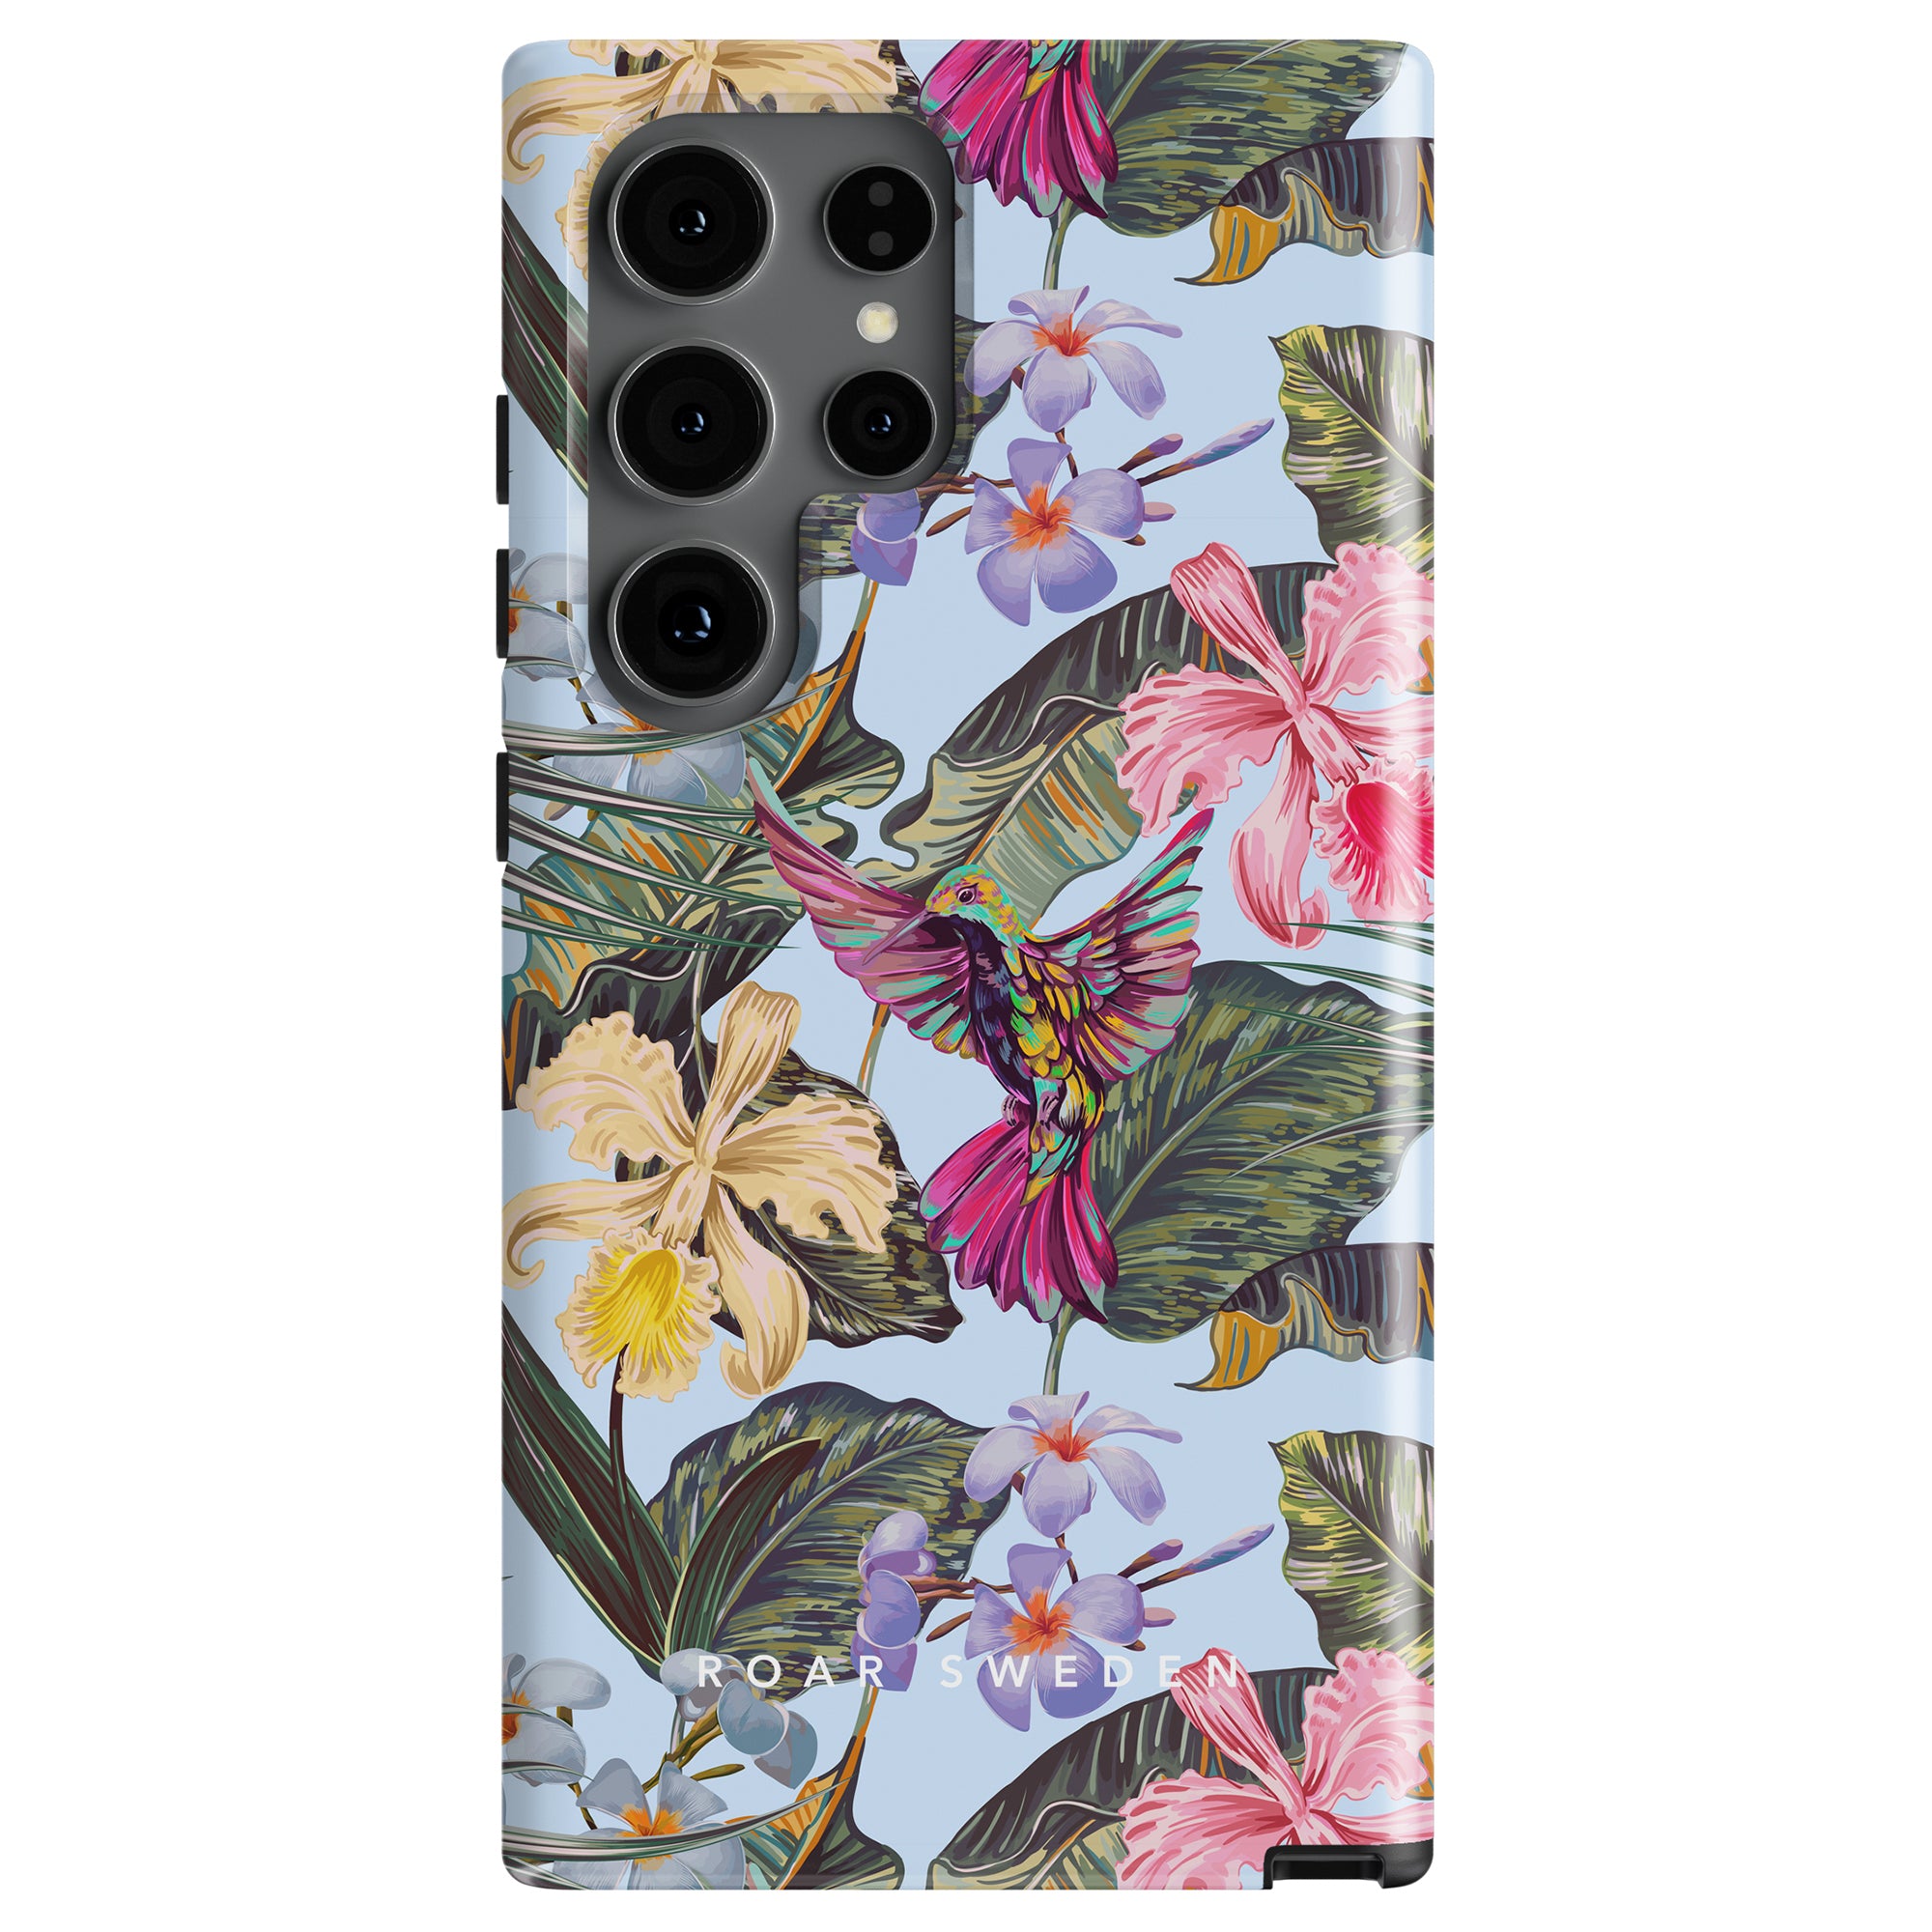 A smartphone with an elegant och hållbart mobilskal depicting various colorful flowers and a bird. The brand name "Colibri - Tough case" is visible at the bottom of the case.